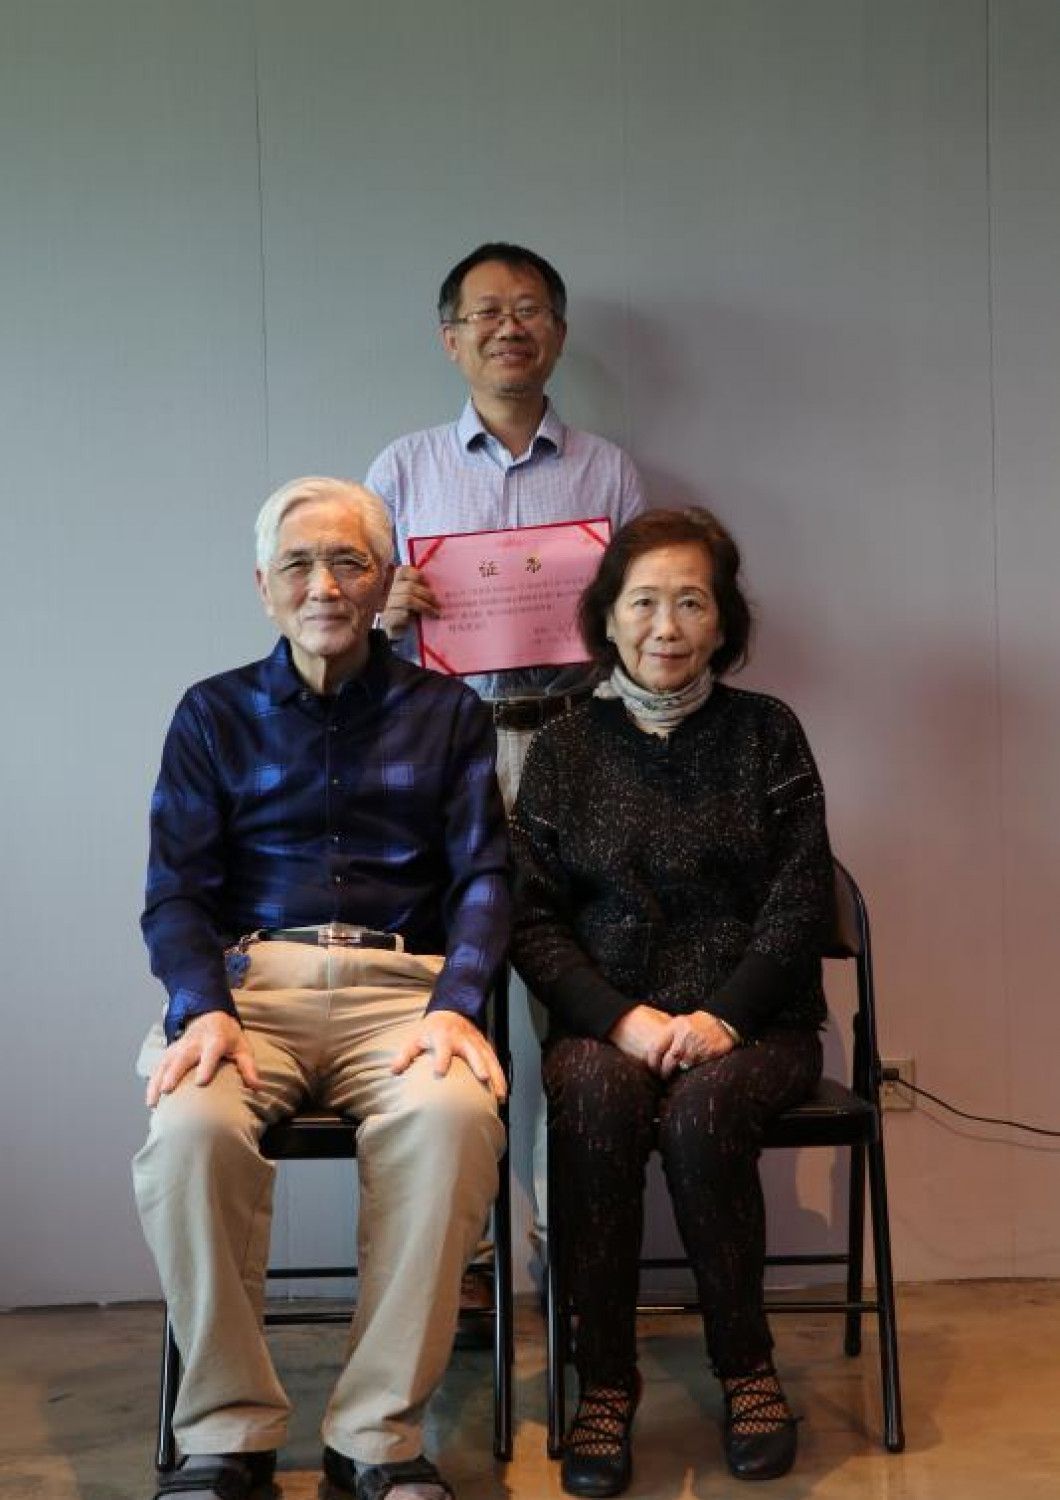 Professor - Dr. Yun Yu, MD and Two Other Person